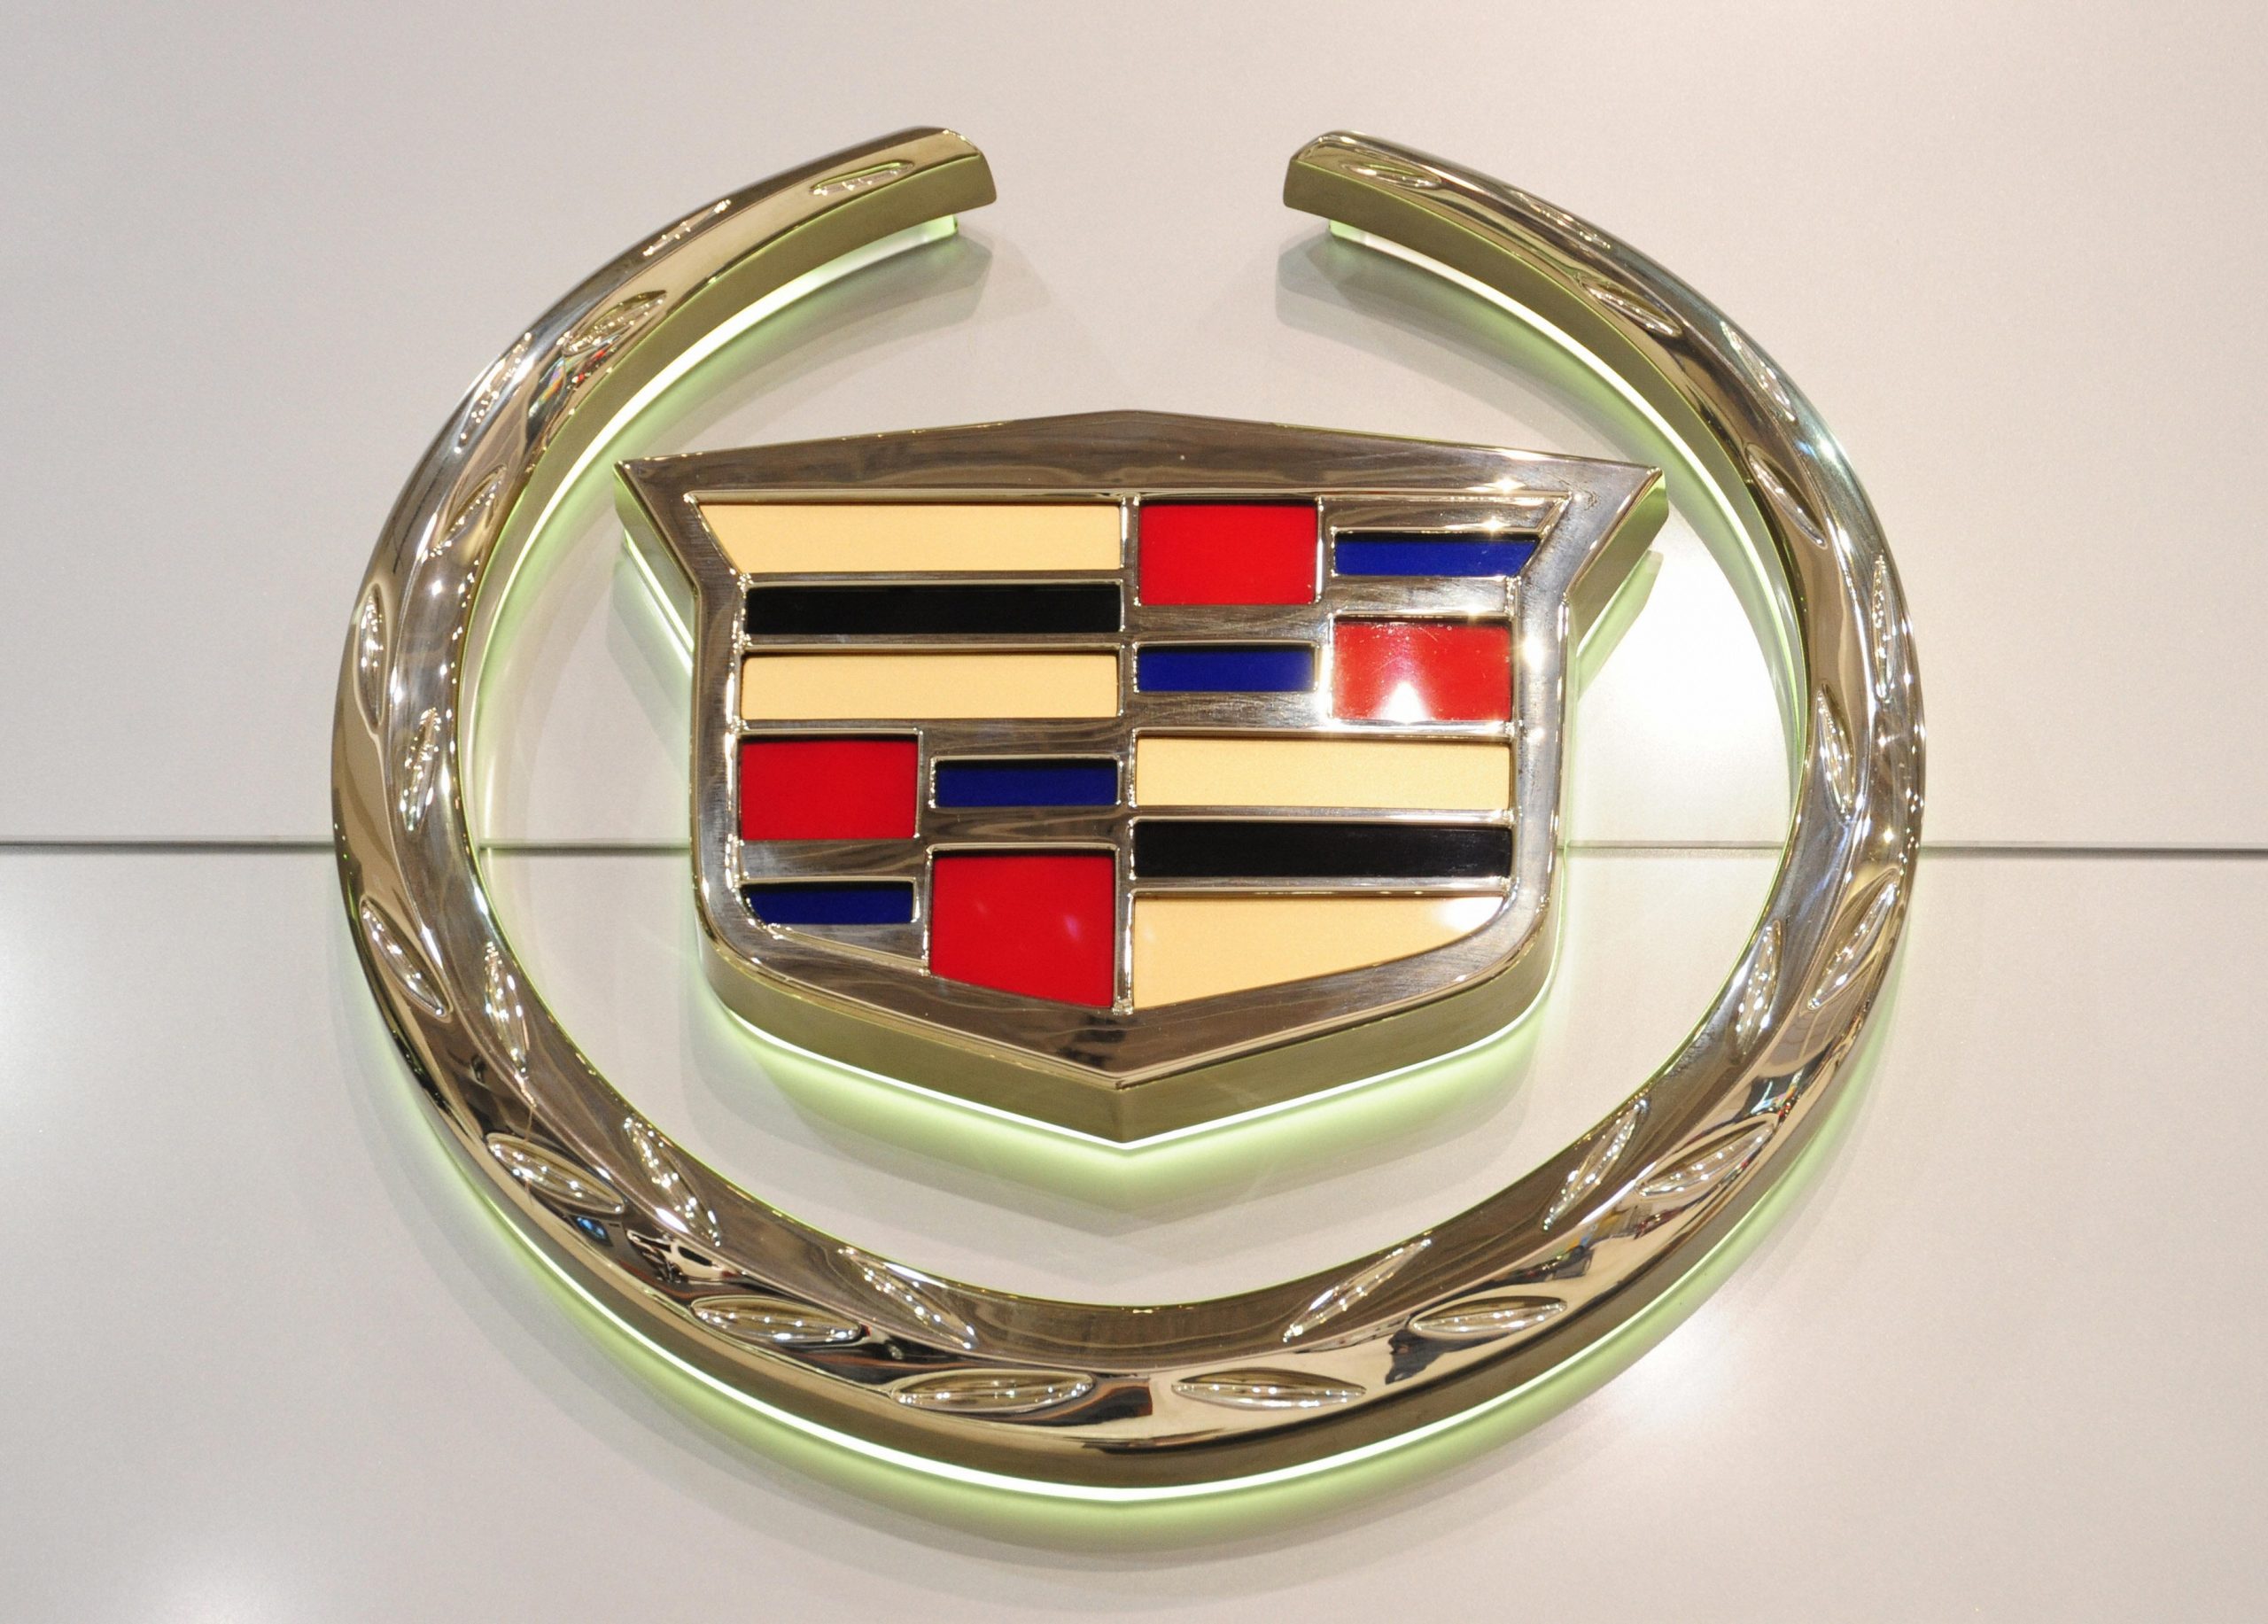 A Cadillac logo displayed on a sign representing one of General Motors luxury brands